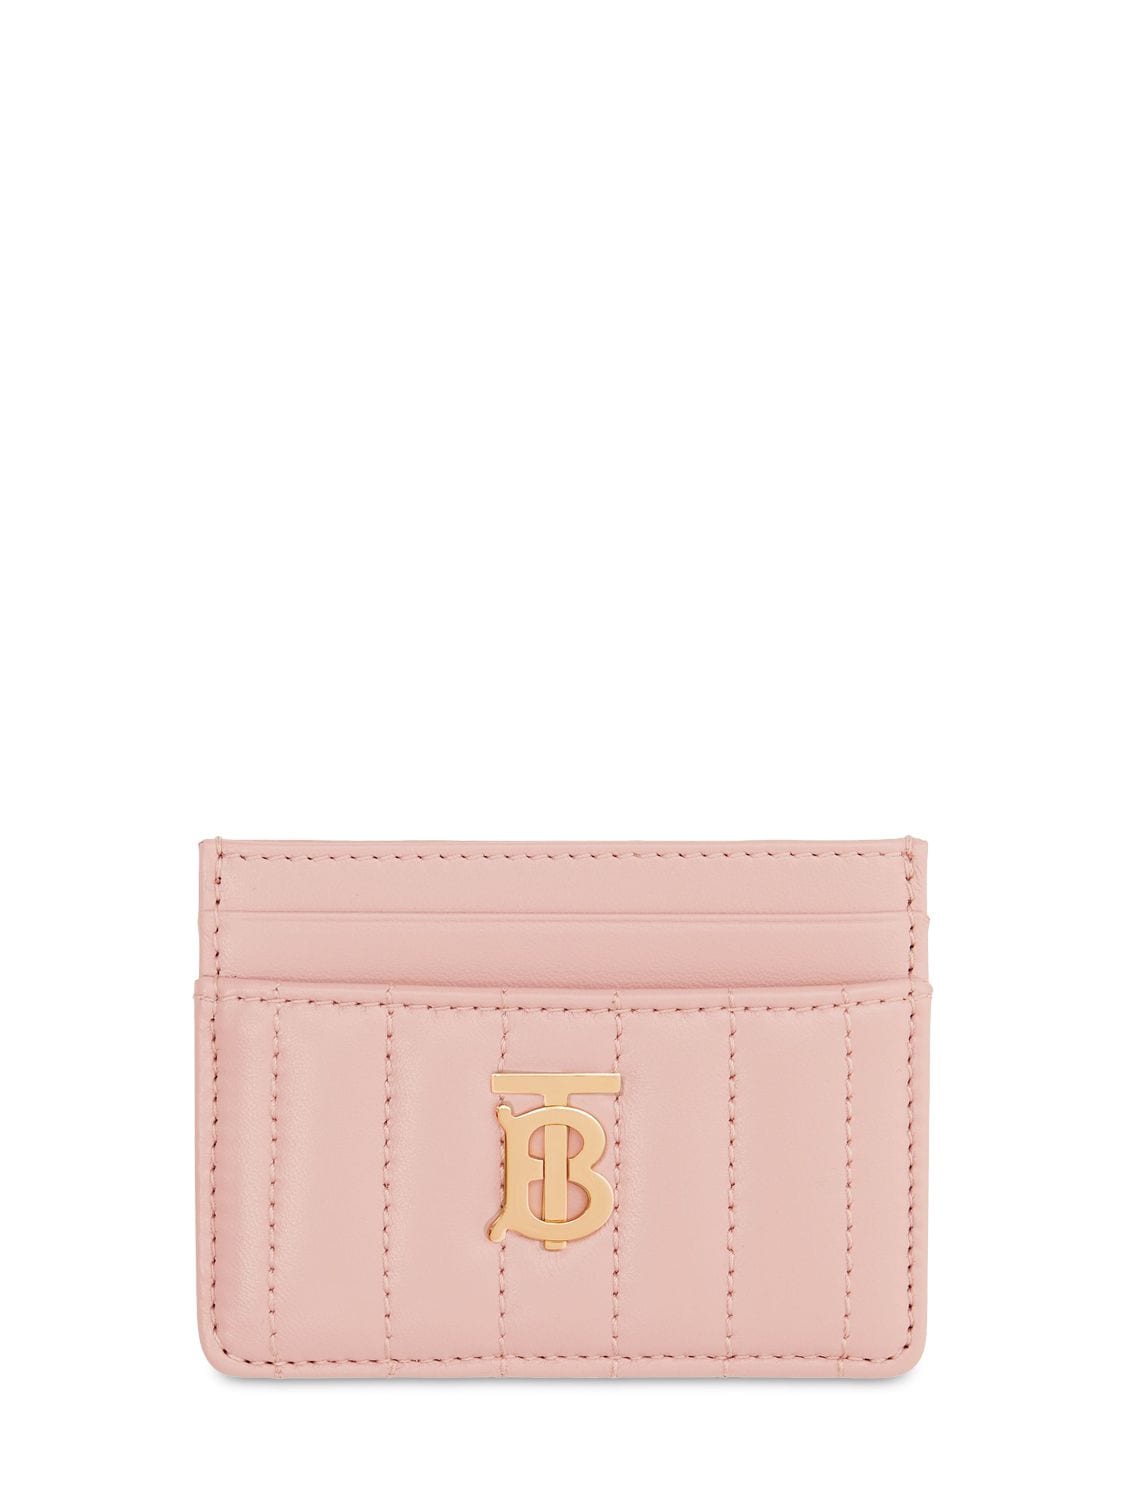 BURBERRY Lola Quilted Leather Card Holder